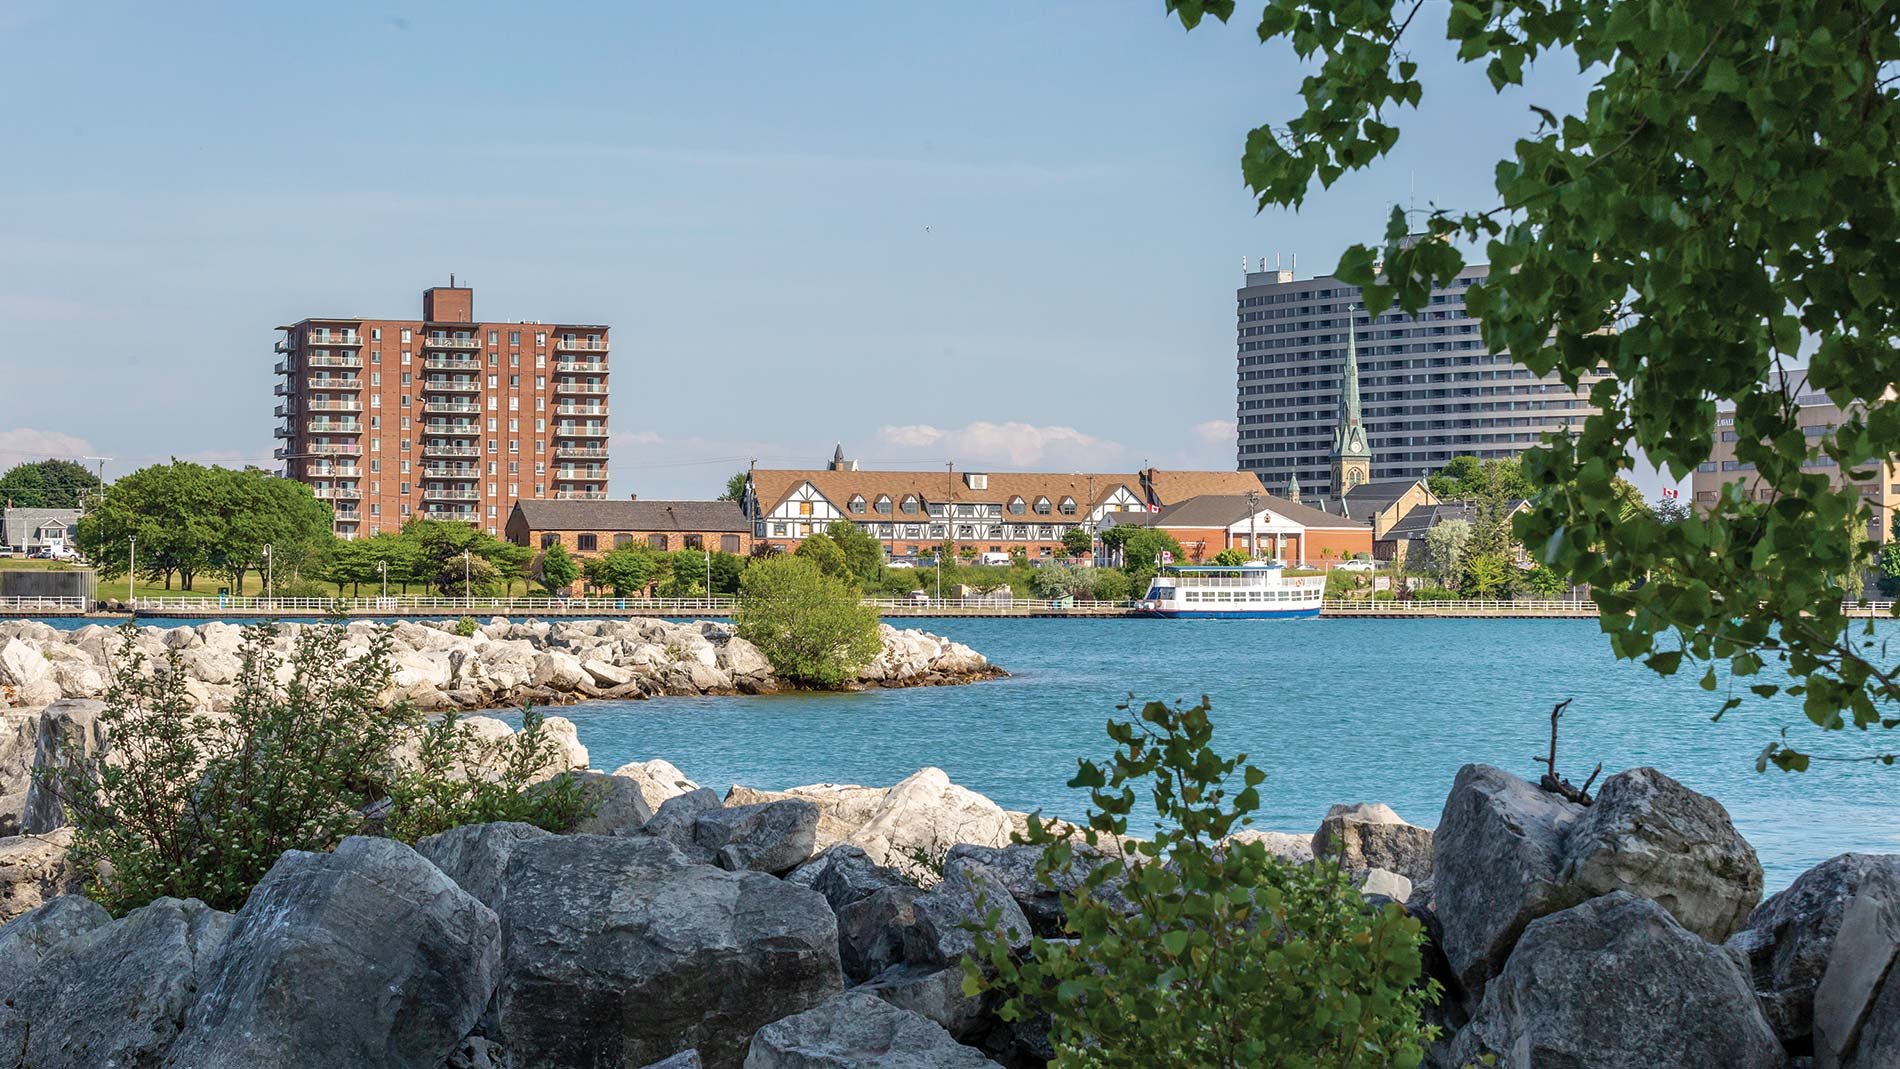 Looking past a rock wall to the Sarnia skyline.